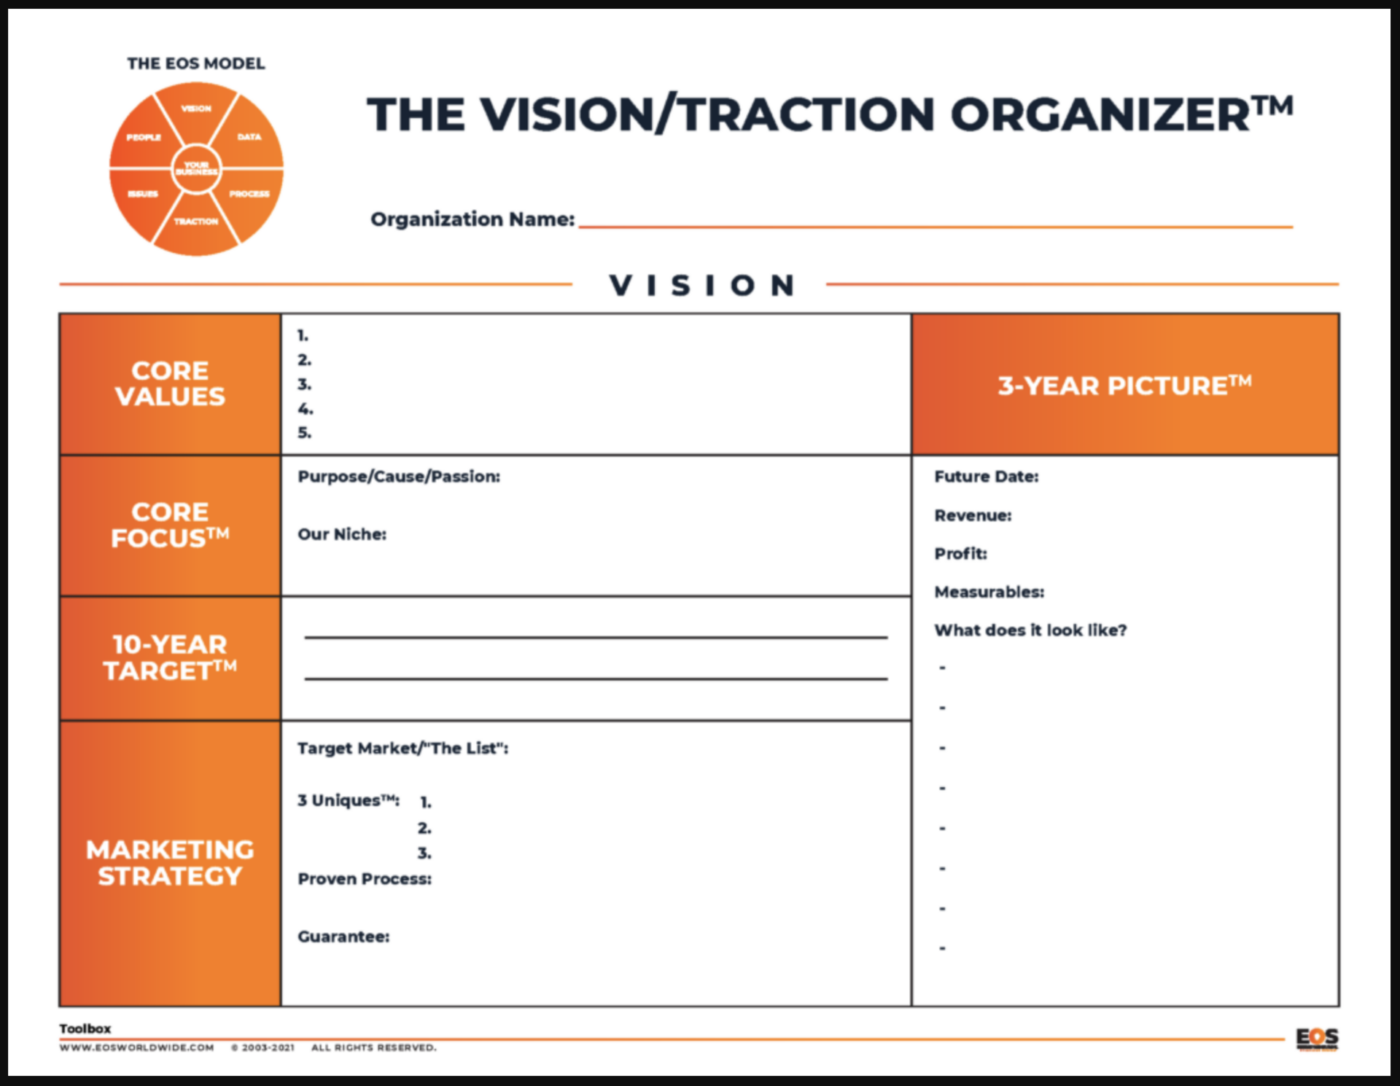 Entrepreneurial Operating System Software for Businesses: Leverage the power of the simple, practical, and proven tool for getting strong in the Vision Component – the Vision/Traction Organizer™